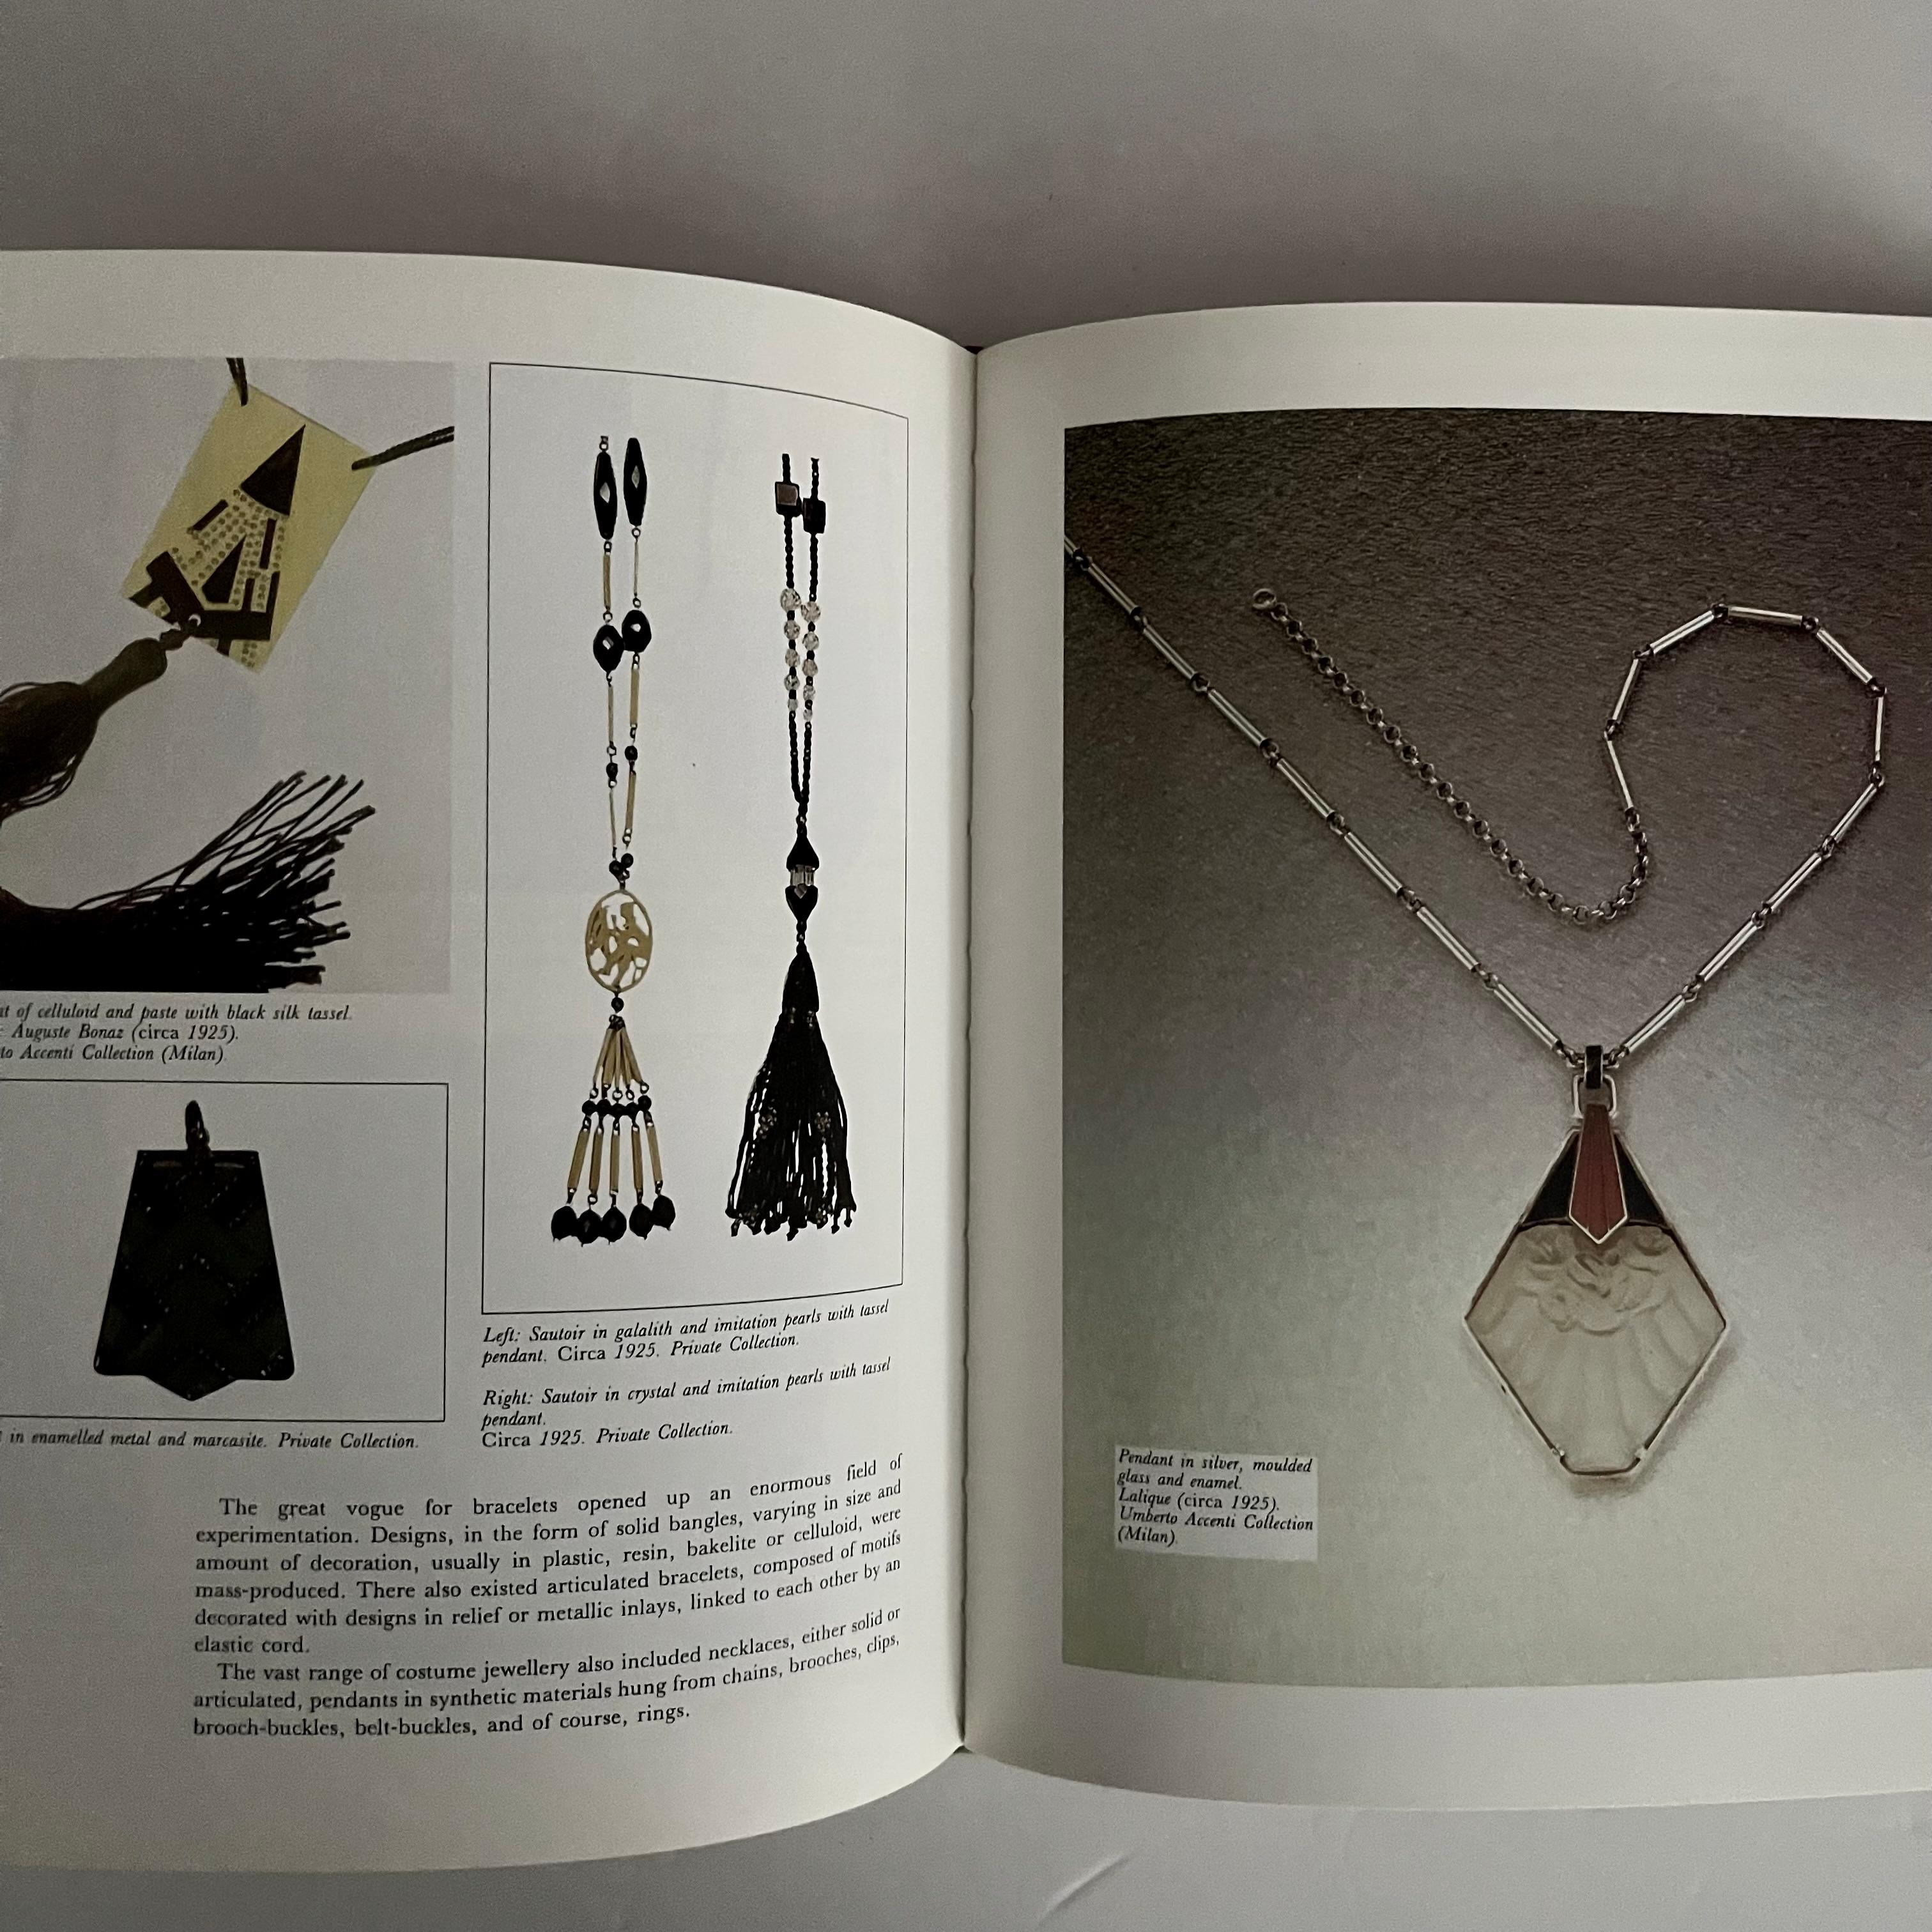 Published by the Antique Collector’s Club, 1st edition, 1989. Hardback, 1989.

A truly sumptuous tome brimmed with Art Deco fine jewellery pieces, a true feast for the eyes of the collectors. This exceptional publication boasts an impressive amount